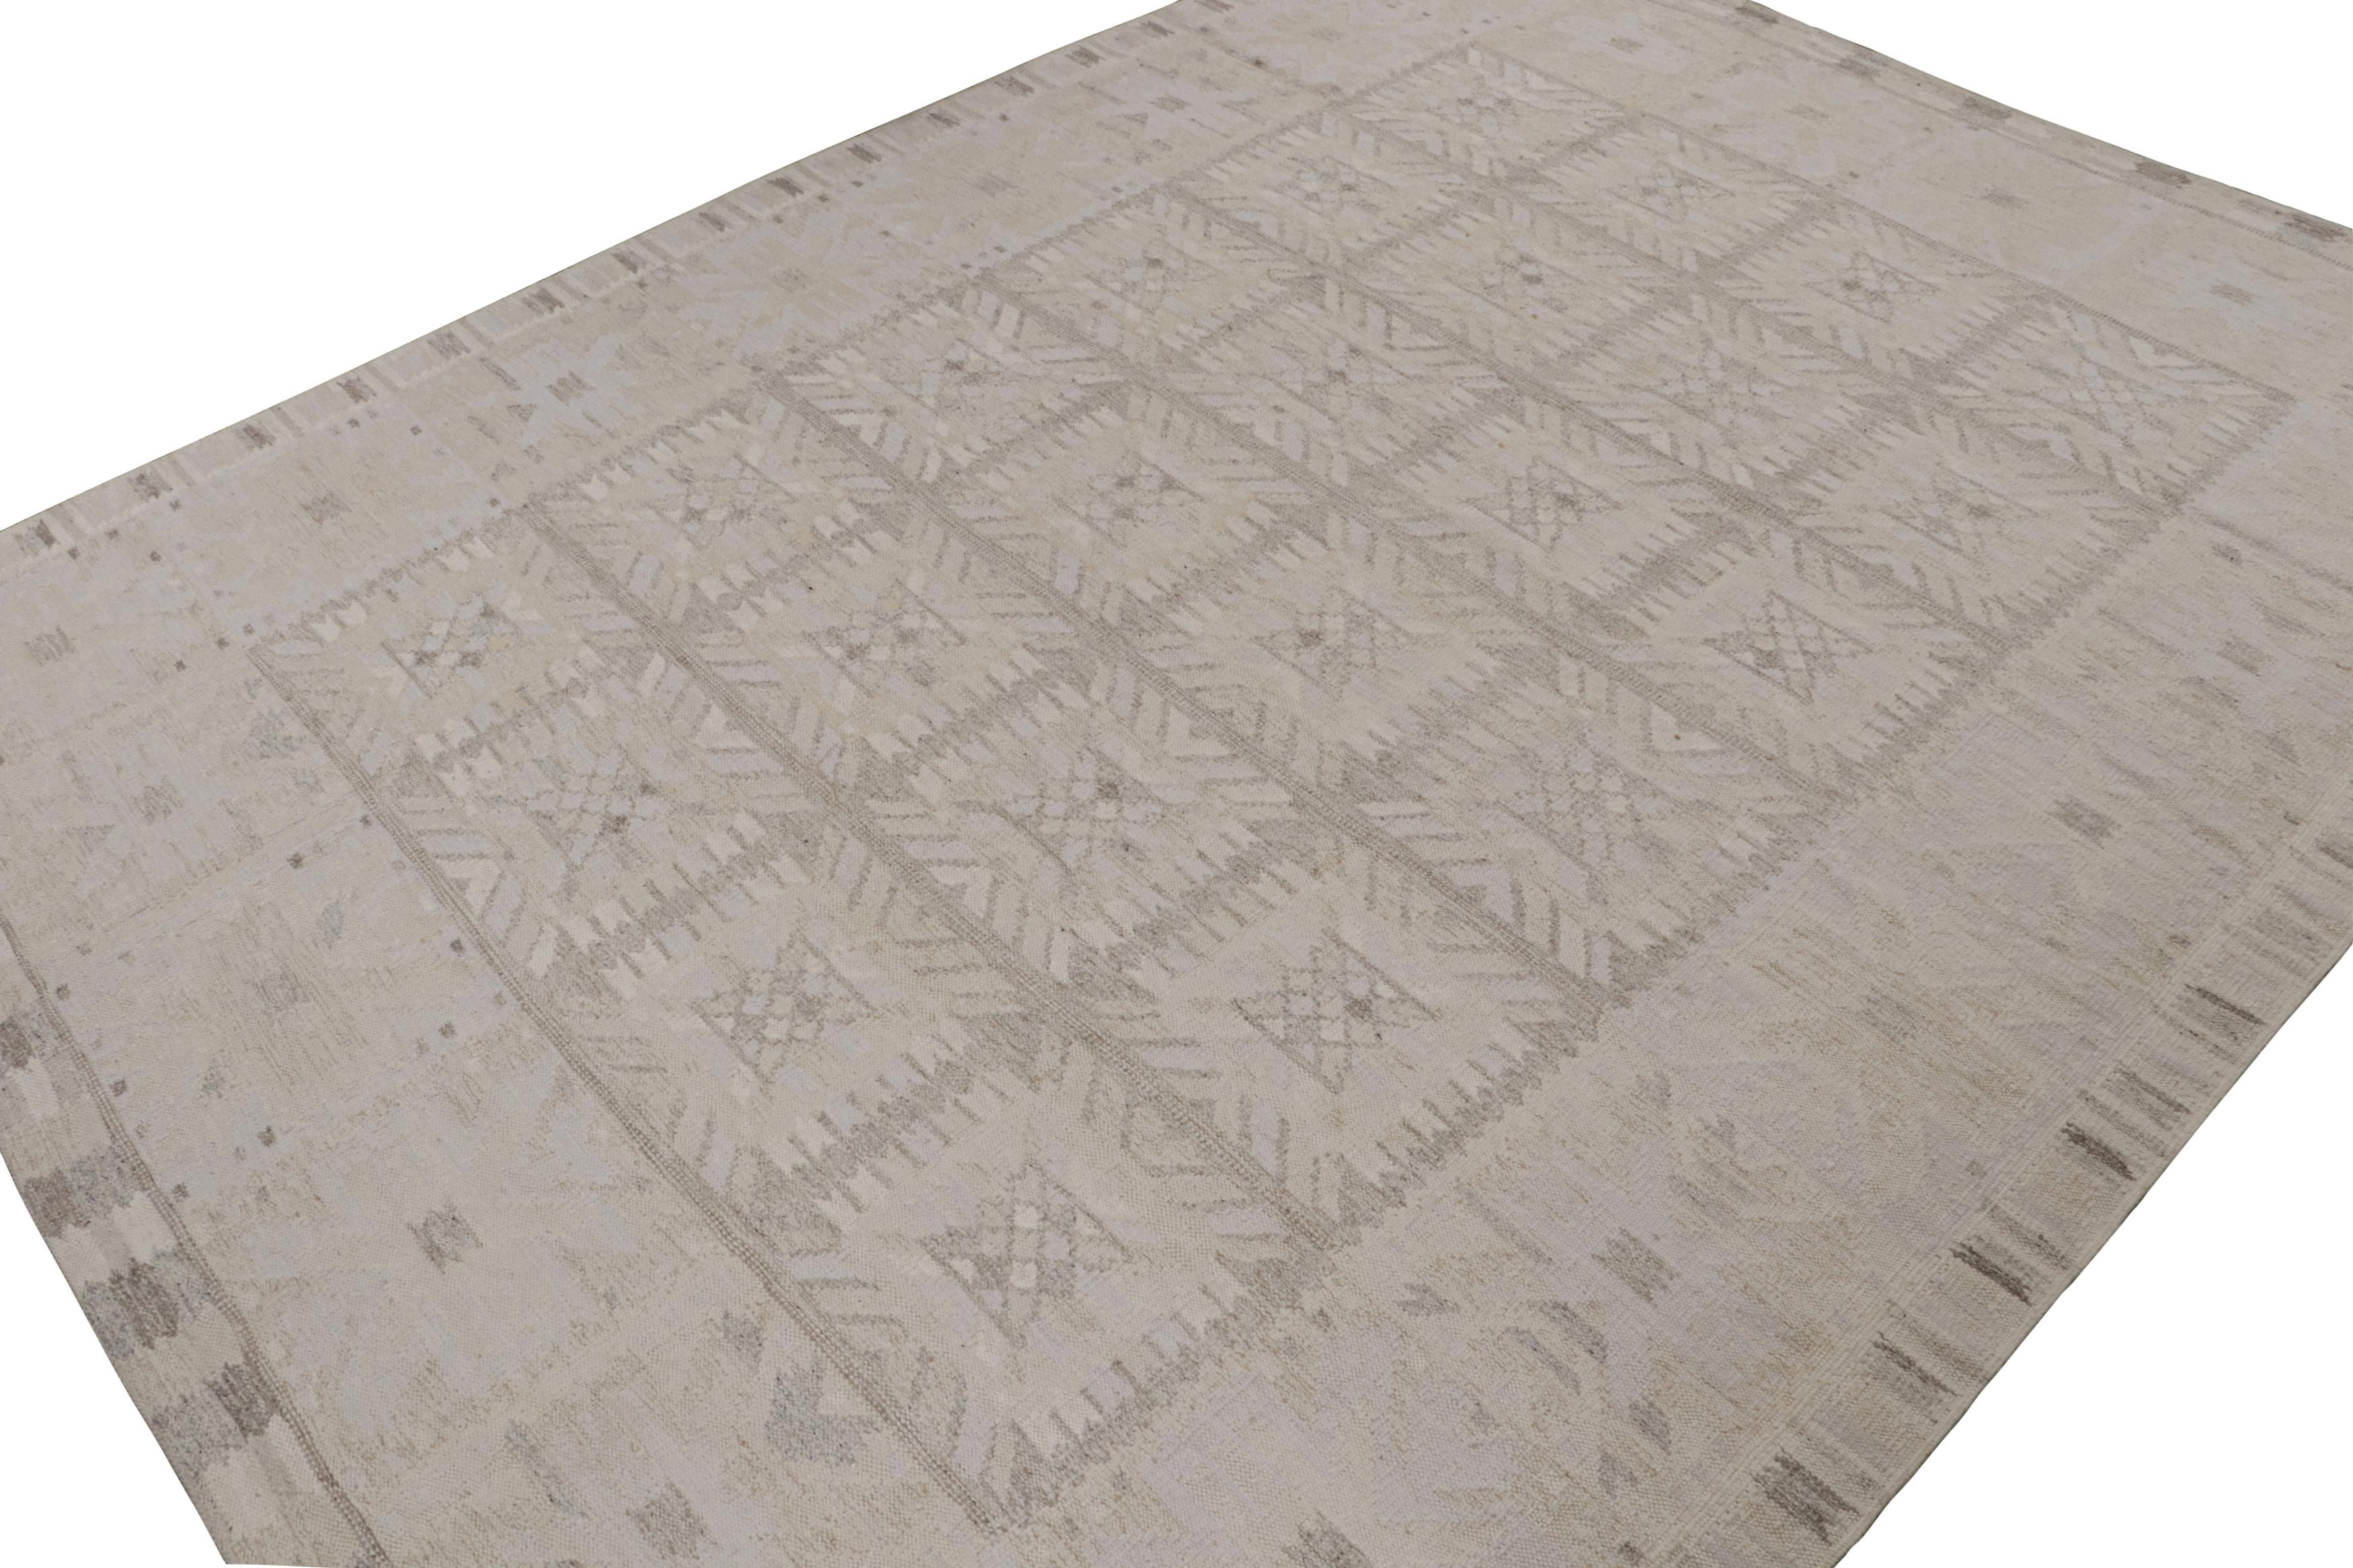 A smart 12x16 Swedish style kilim from our award-winning Scandinavian flat weave collection. Handwoven in wool, natural yarns and some accents of silk.

On the Design: 

This rug enjoys geometric patterns in gray white with ivory accents. Keen eyes